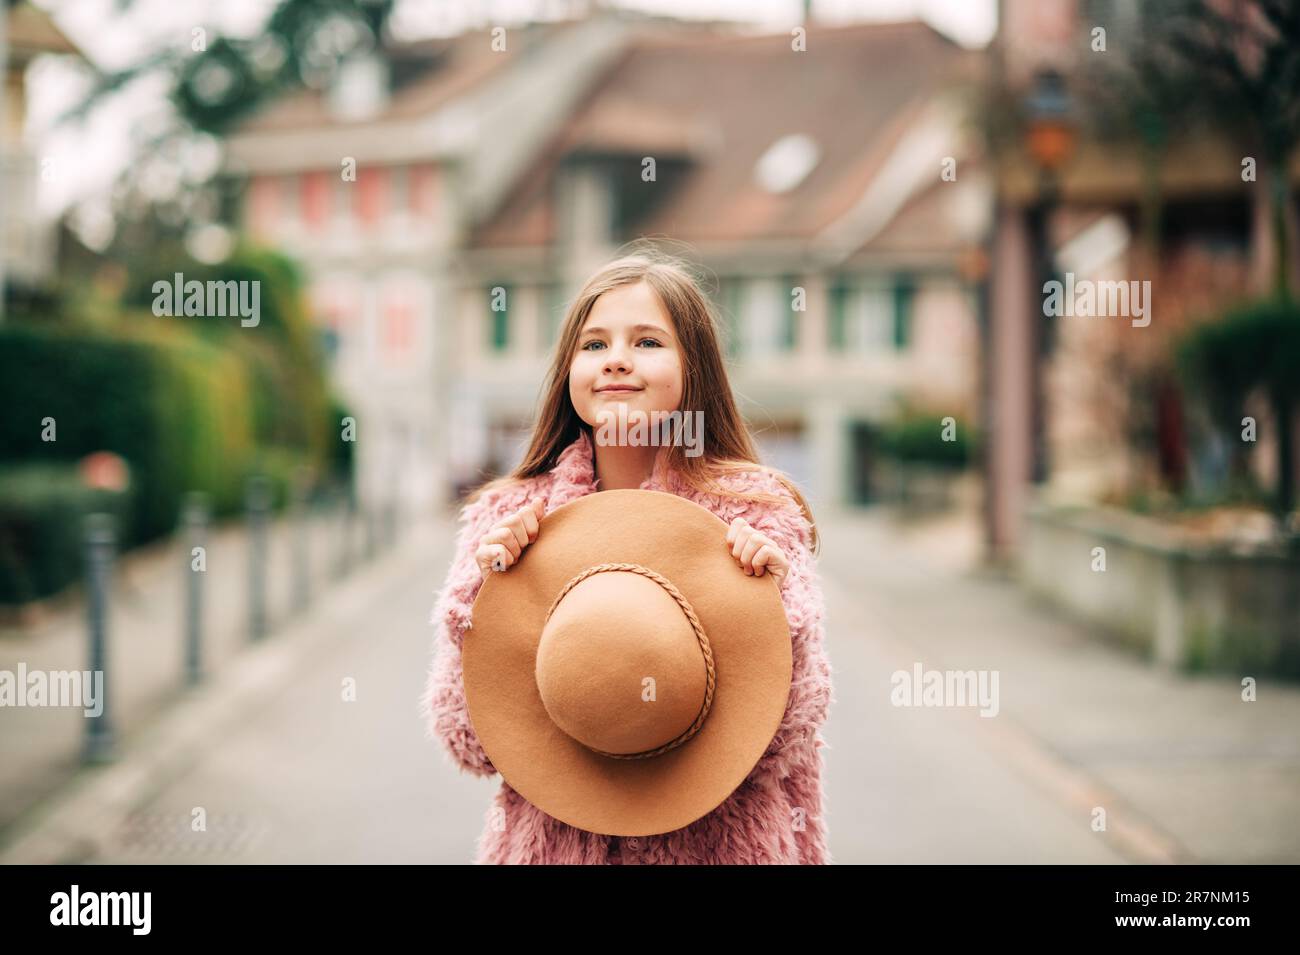 Outdoor portrait of adorable young kid girl holding brown hat, spring fashion for children Stock Photo